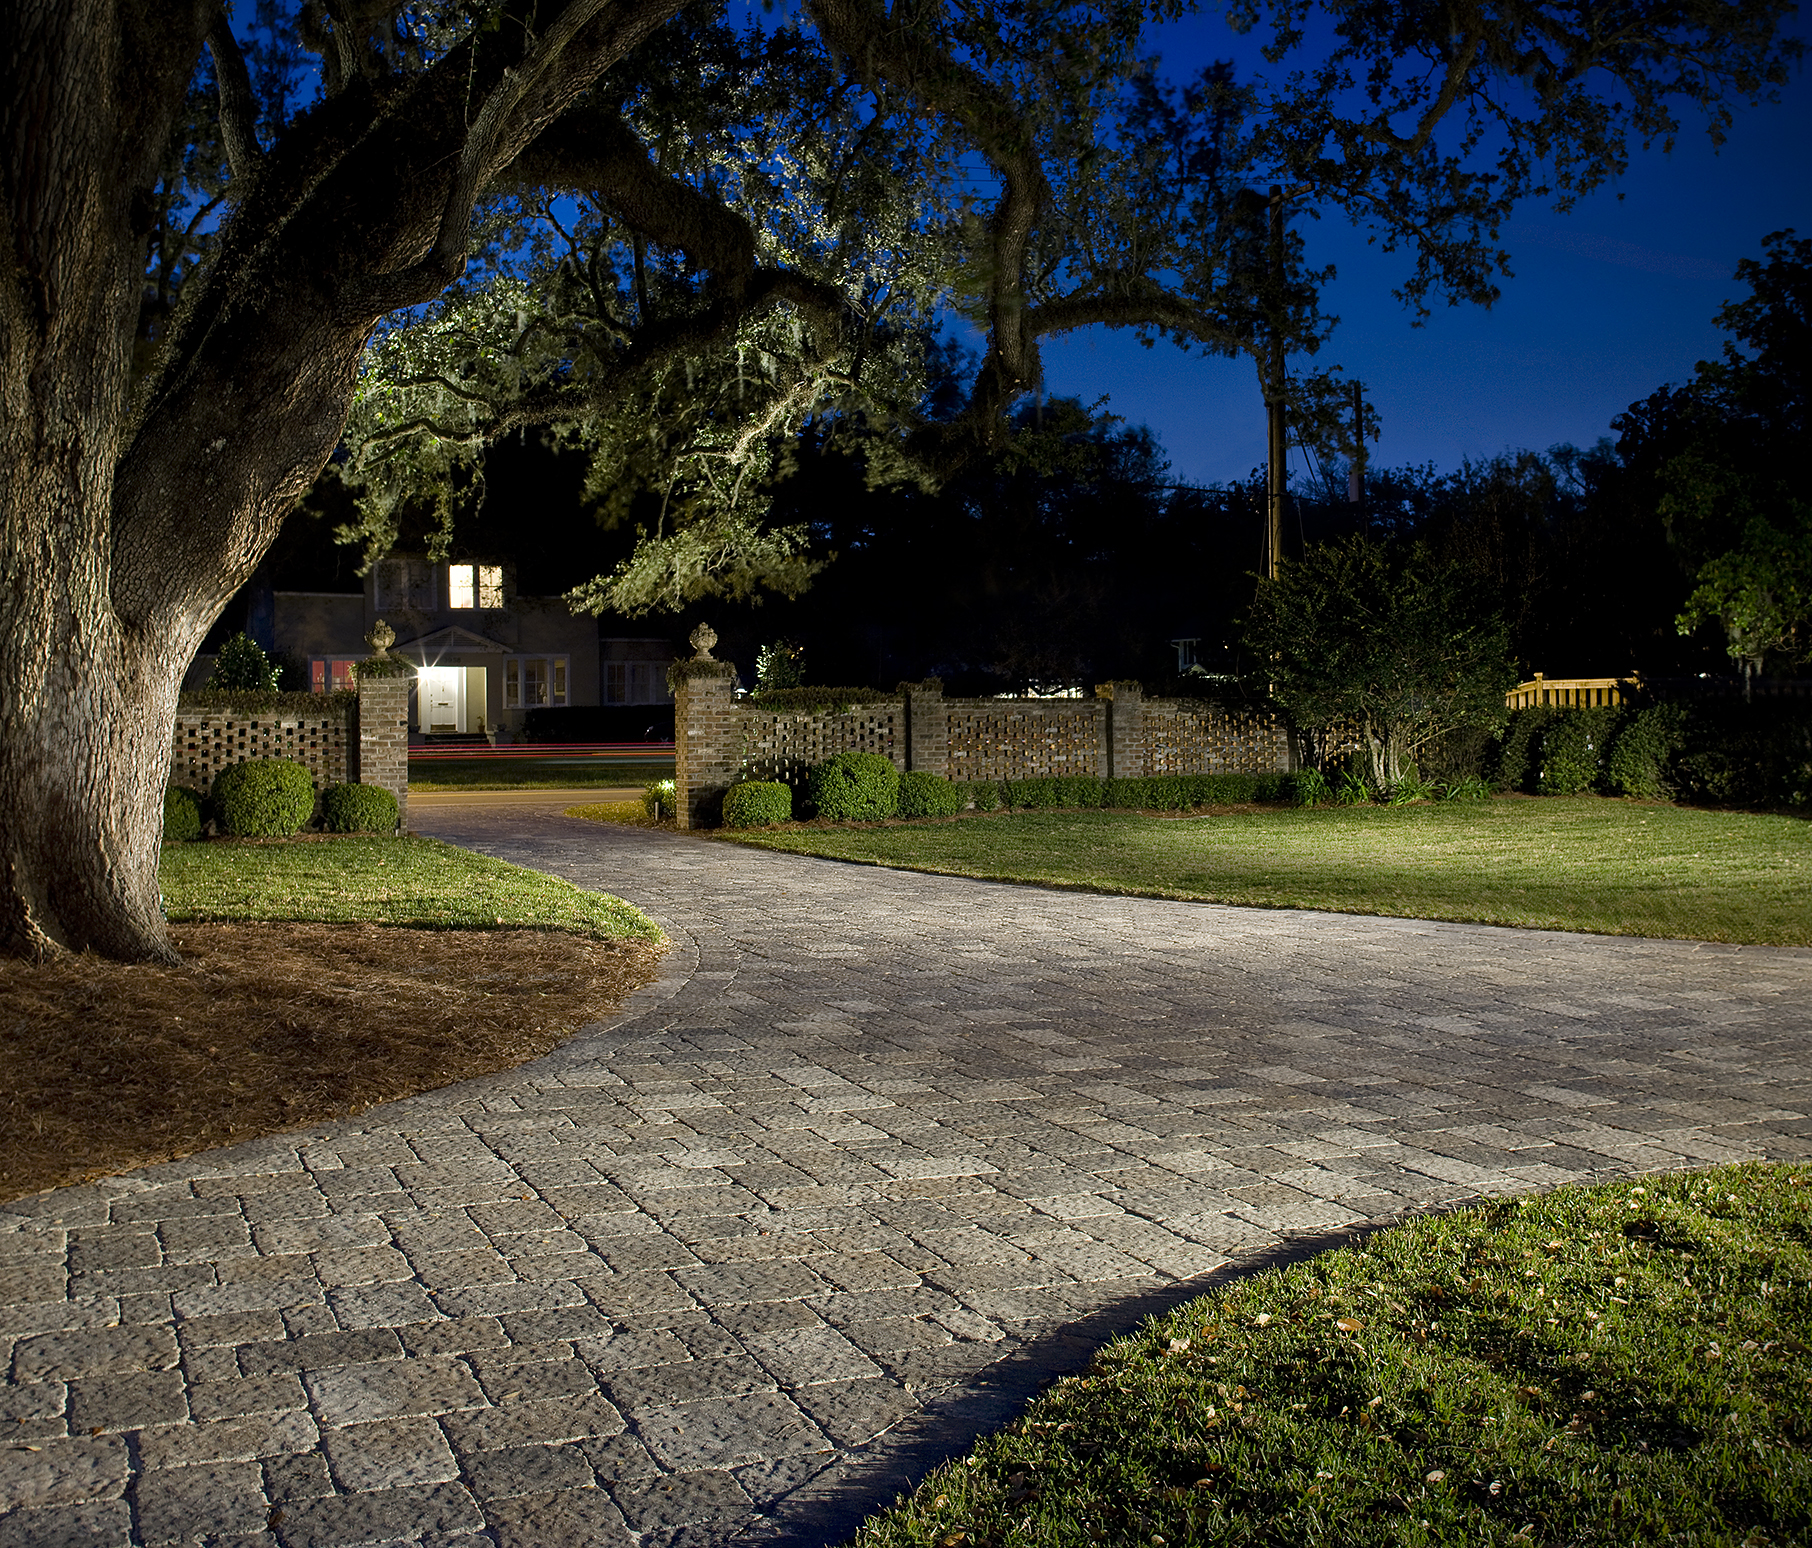 Masonry Hardscape images by Mike Butler Pavers